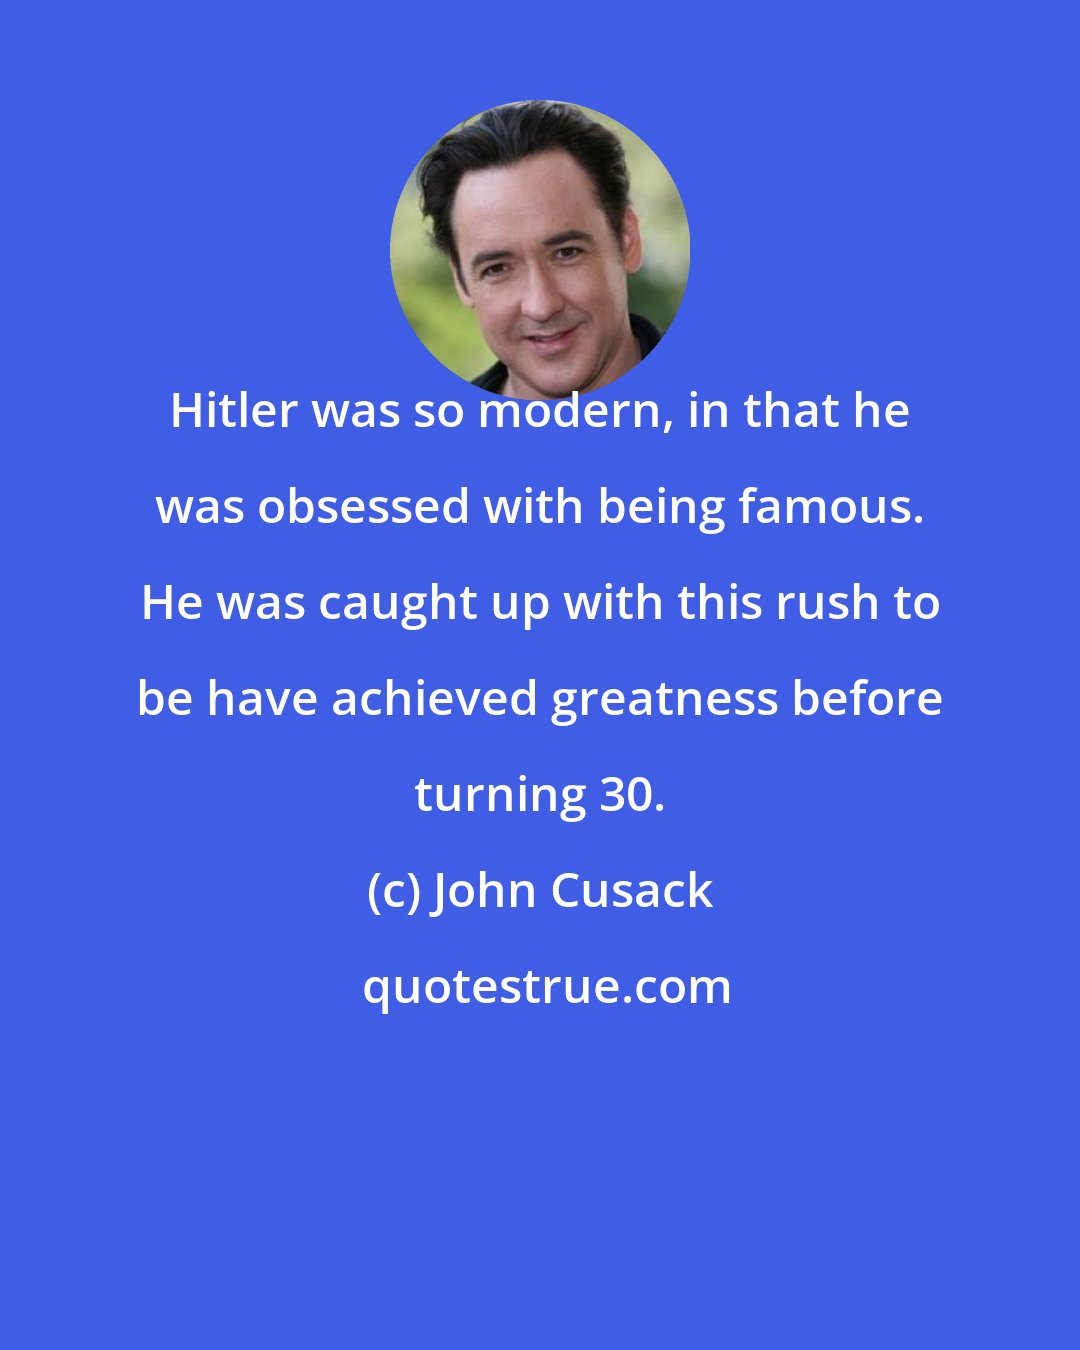 John Cusack: Hitler was so modern, in that he was obsessed with being famous. He was caught up with this rush to be have achieved greatness before turning 30.